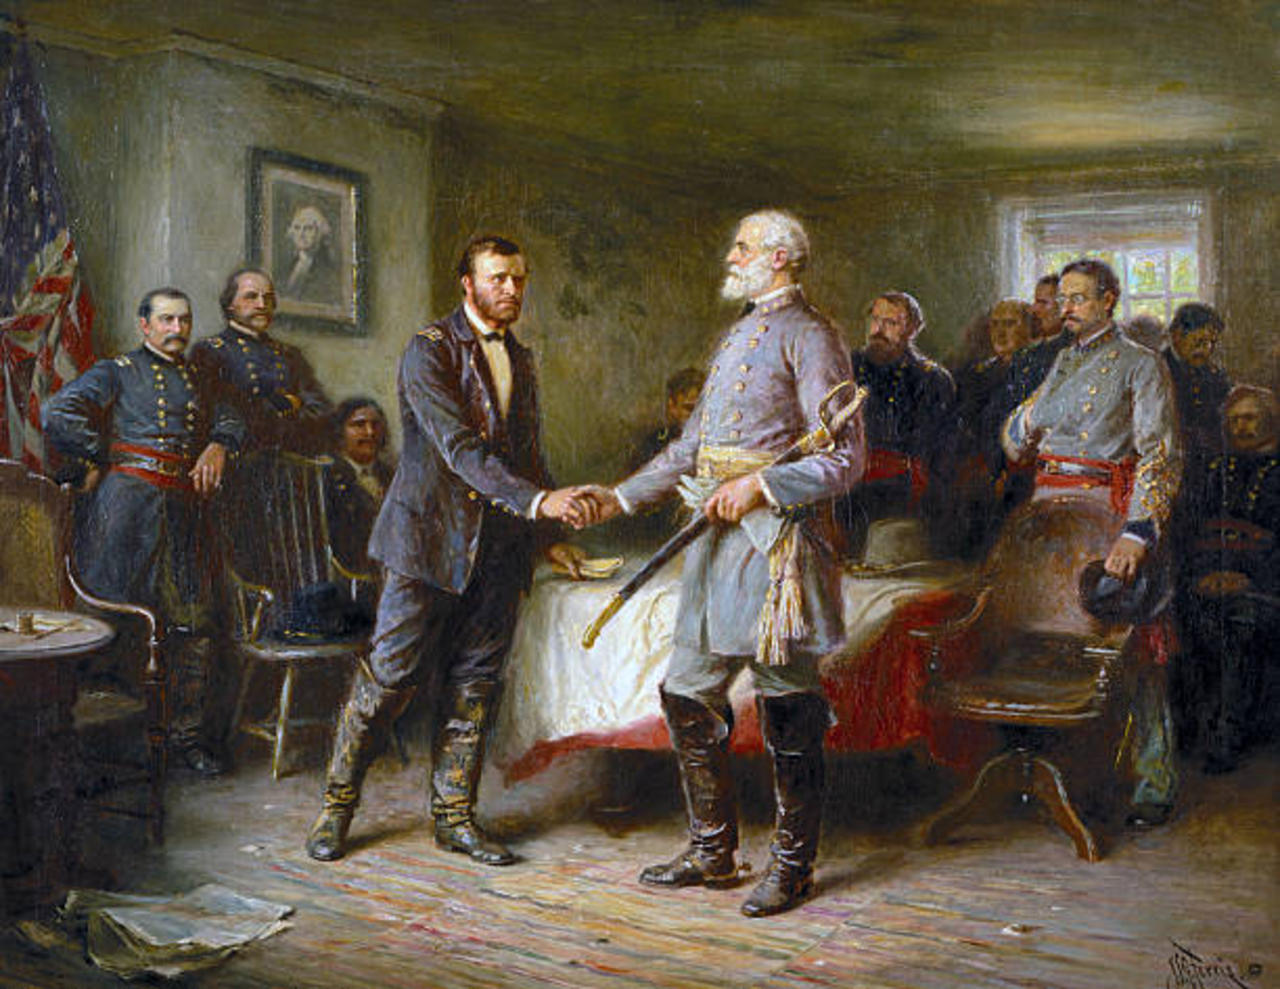 This Day in History: Robert E. Lee Surrenders (Sunday, April 9th)